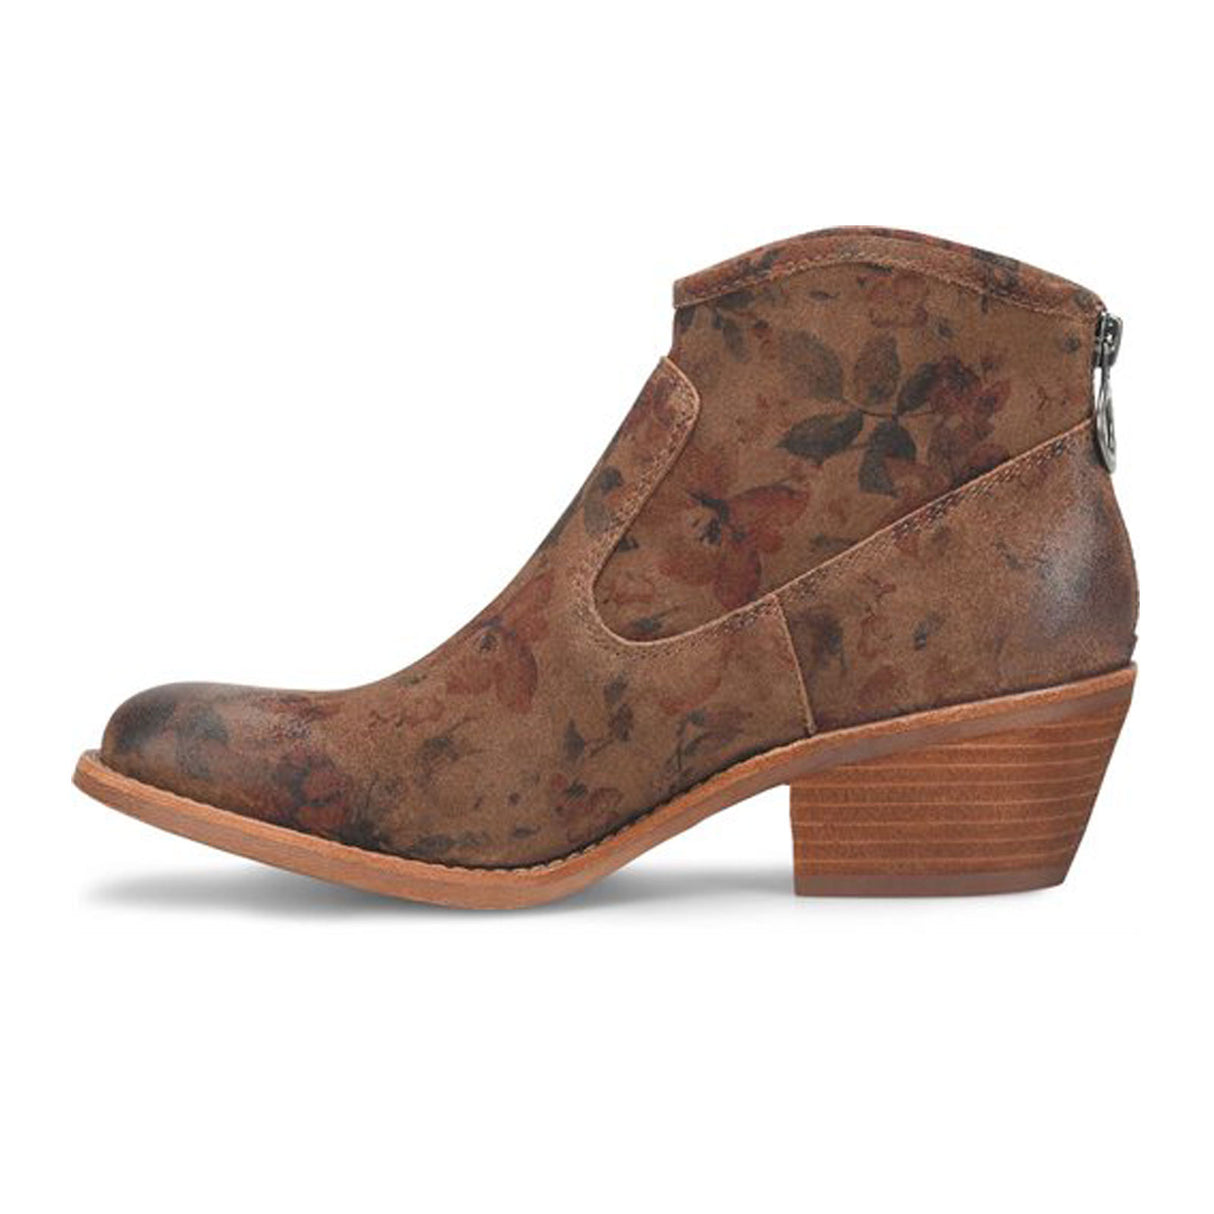 Sofft Aisley Ankle Boot (Women) - Brown Boots - Fashion - Ankle Boot - The Heel Shoe Fitters